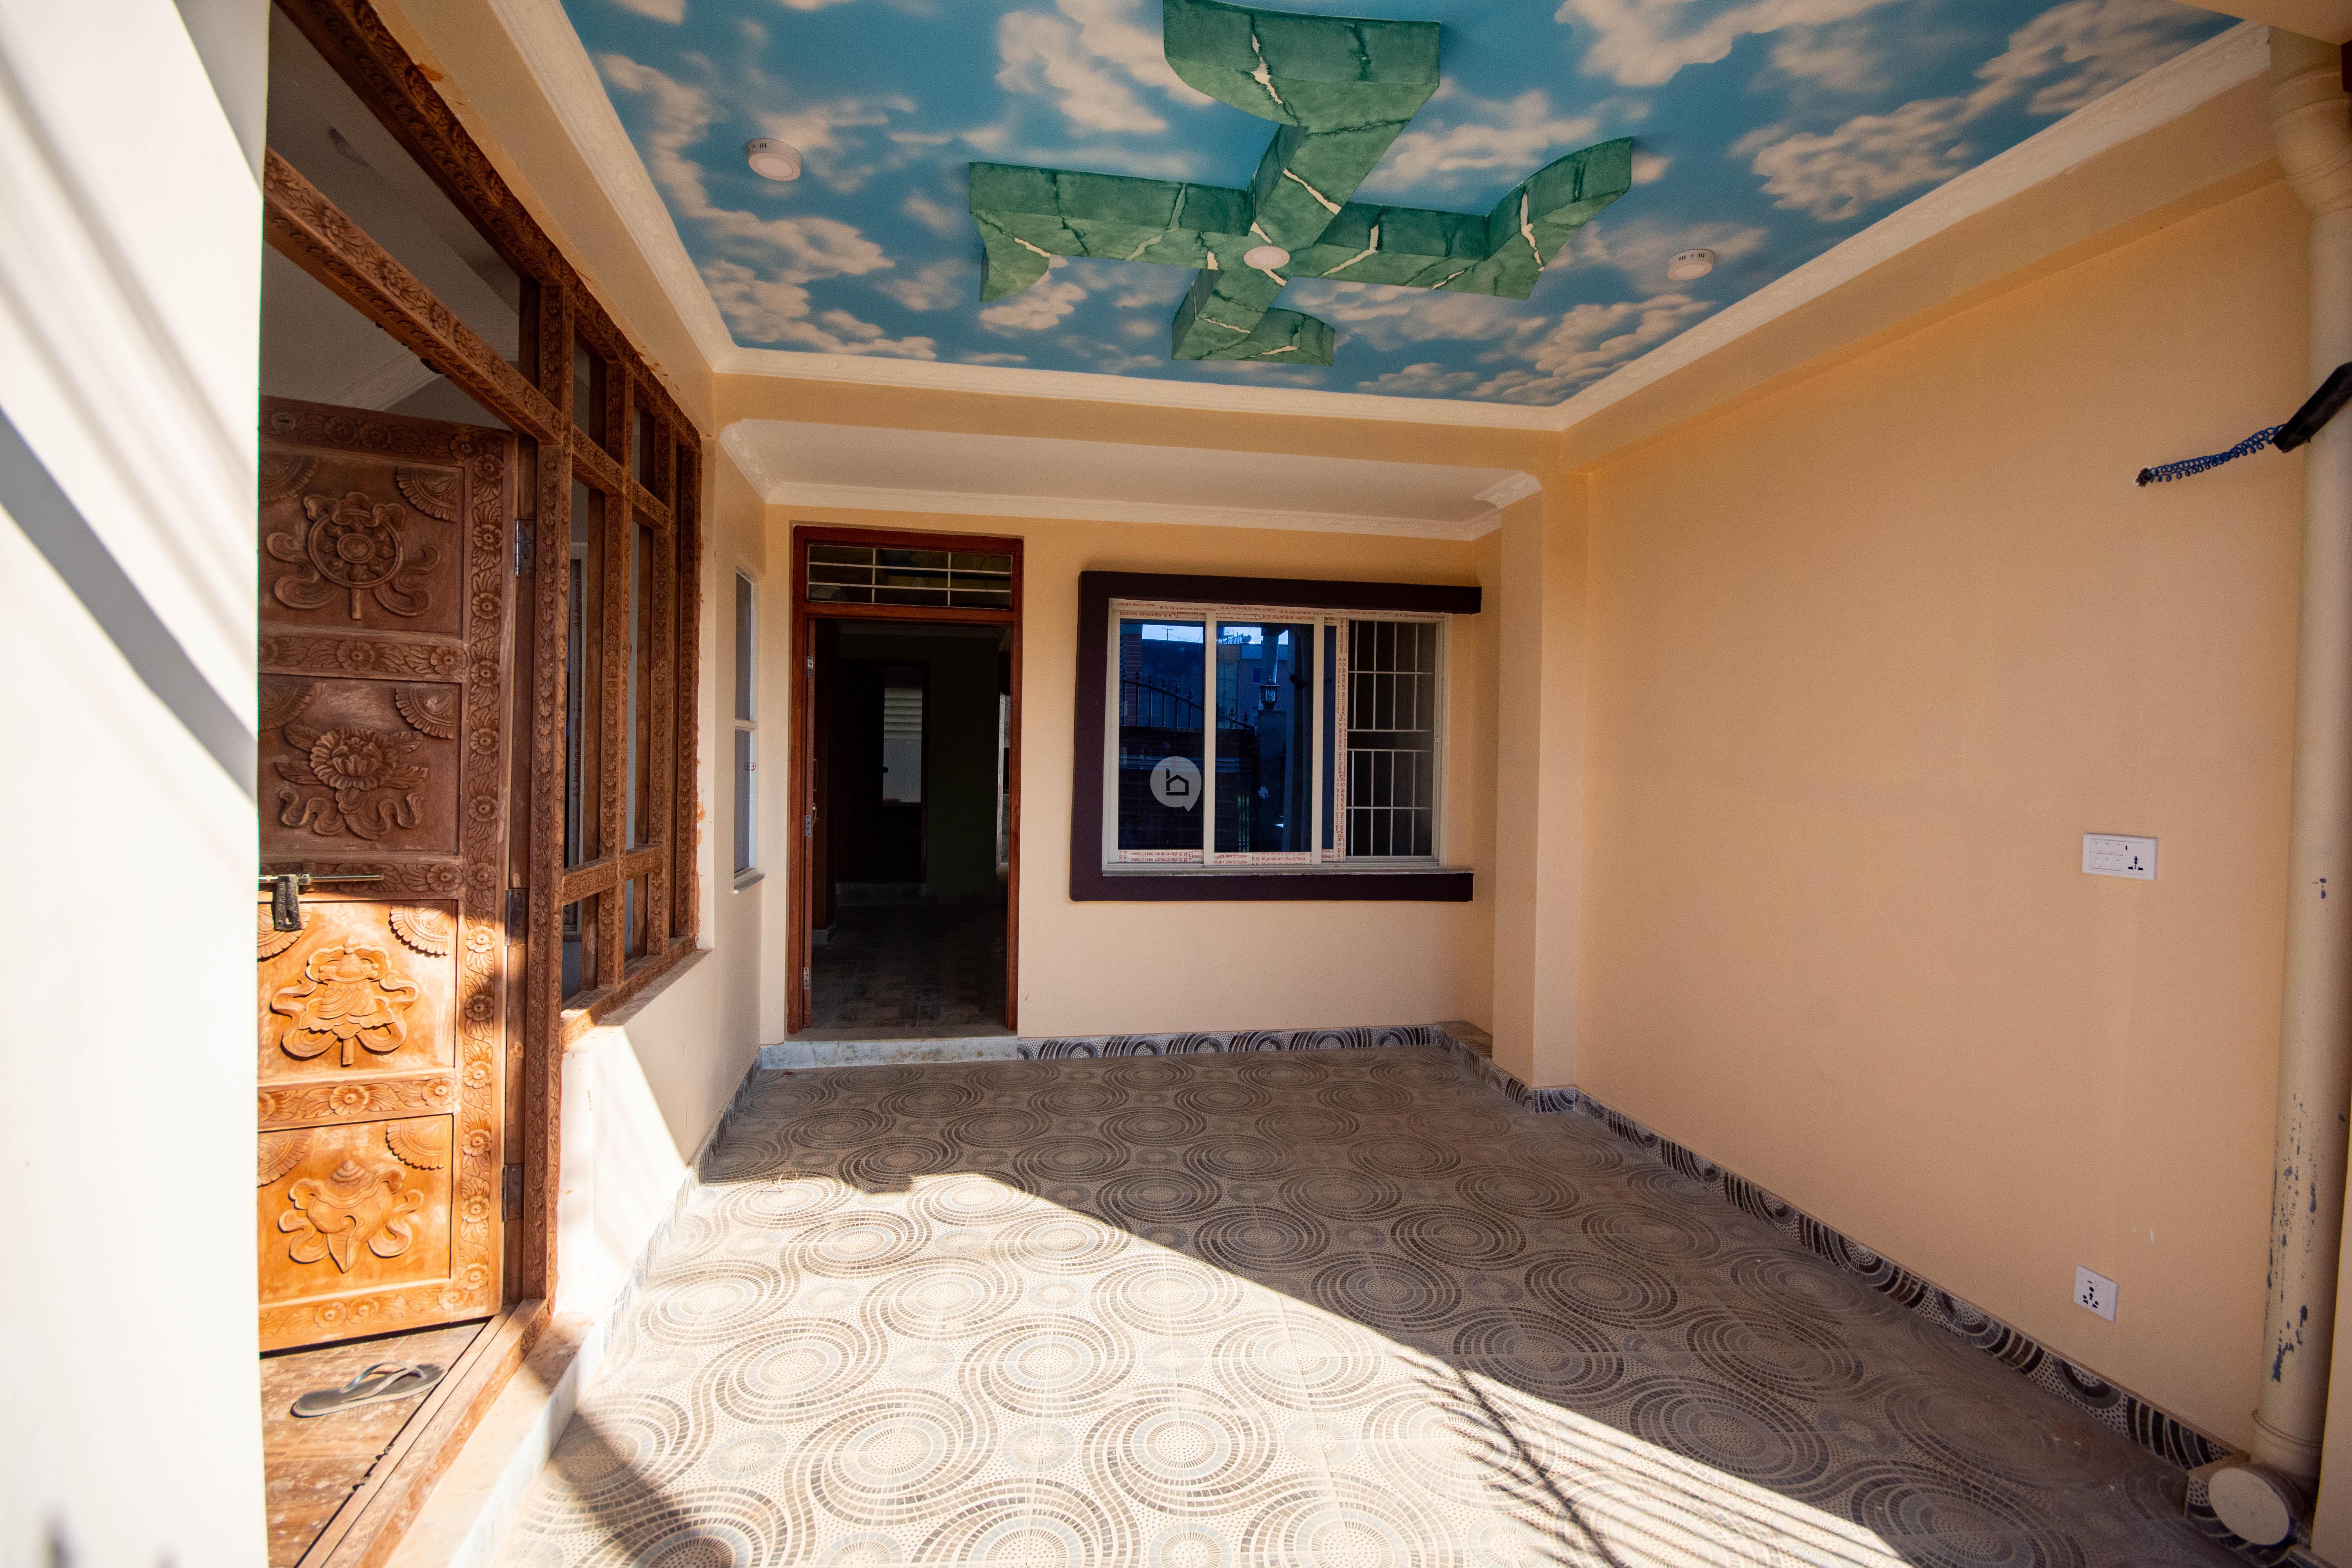 SOLD OUT : House for Sale in Imadol, Lalitpur Image 4